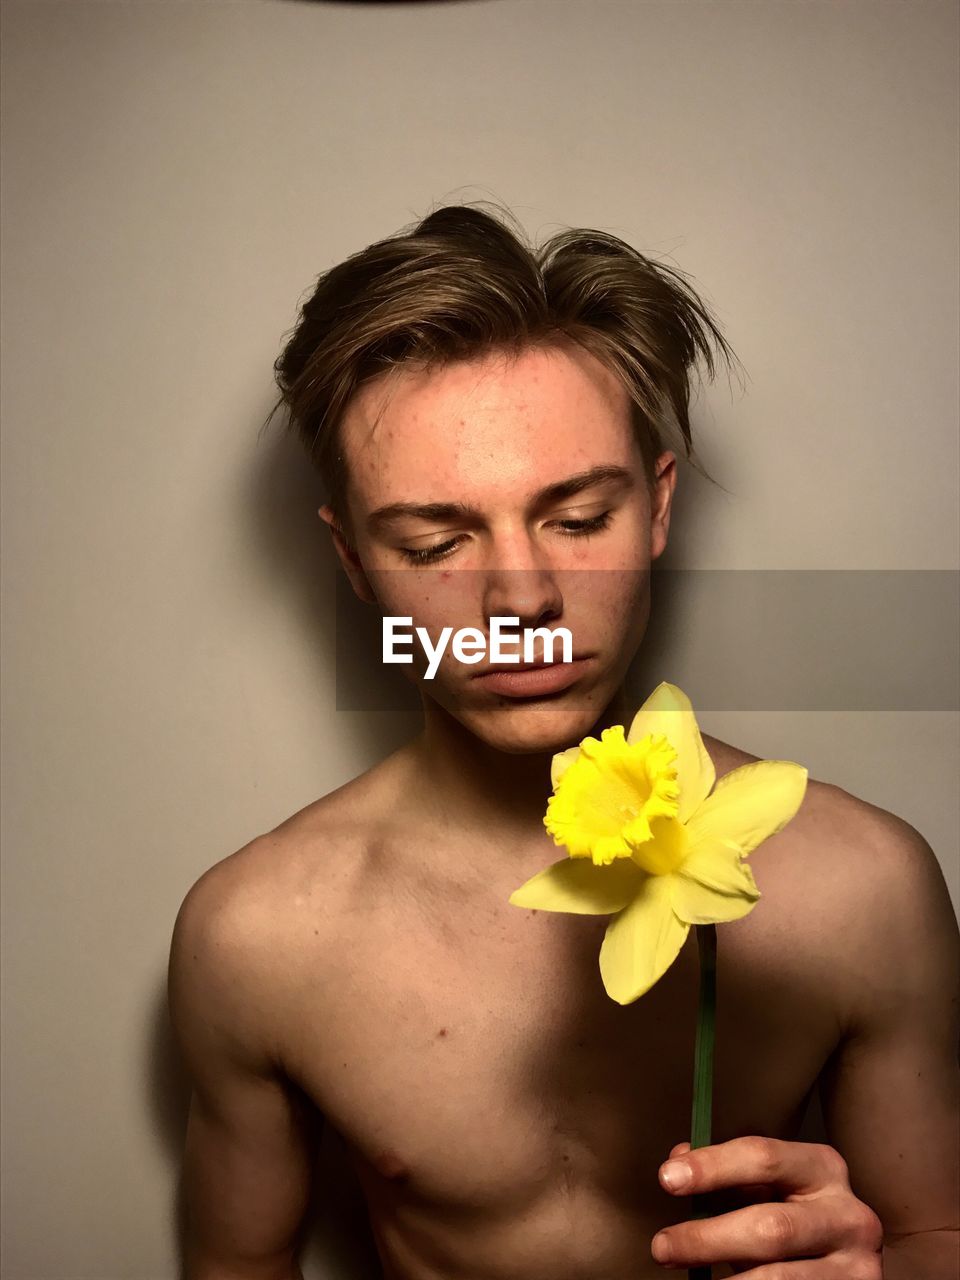 Shirtless young man holding yellow daffodil against wall